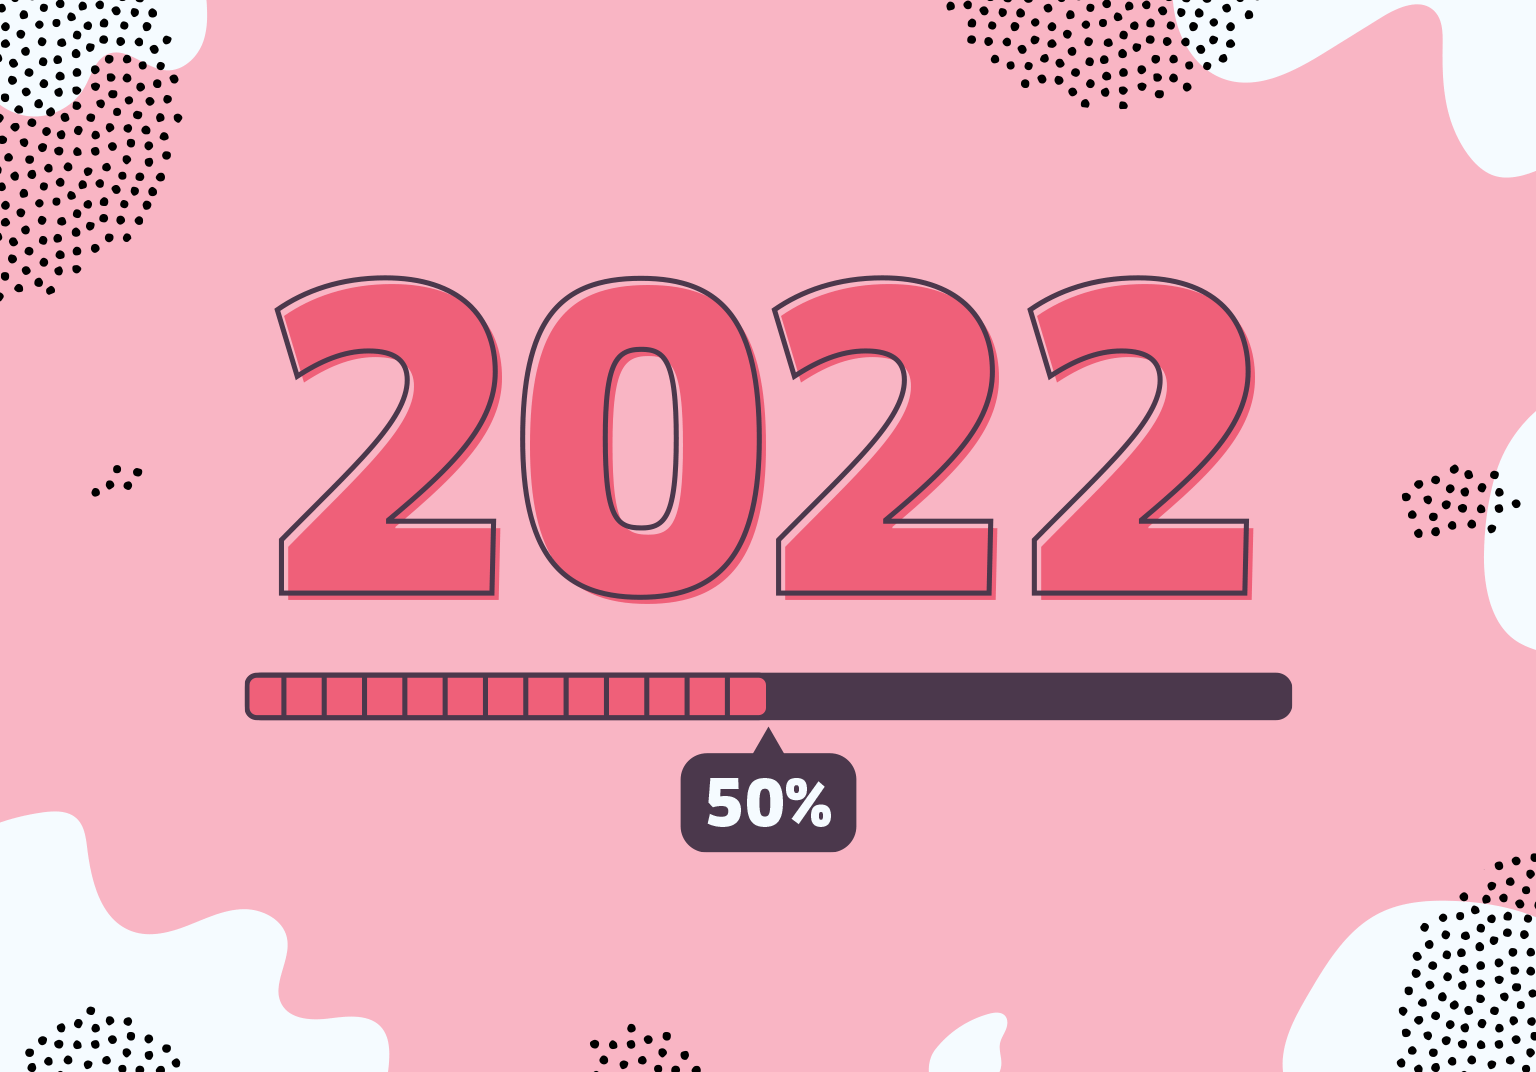 '2022' illustrated on a pink background underlined with a 50% completion bar below